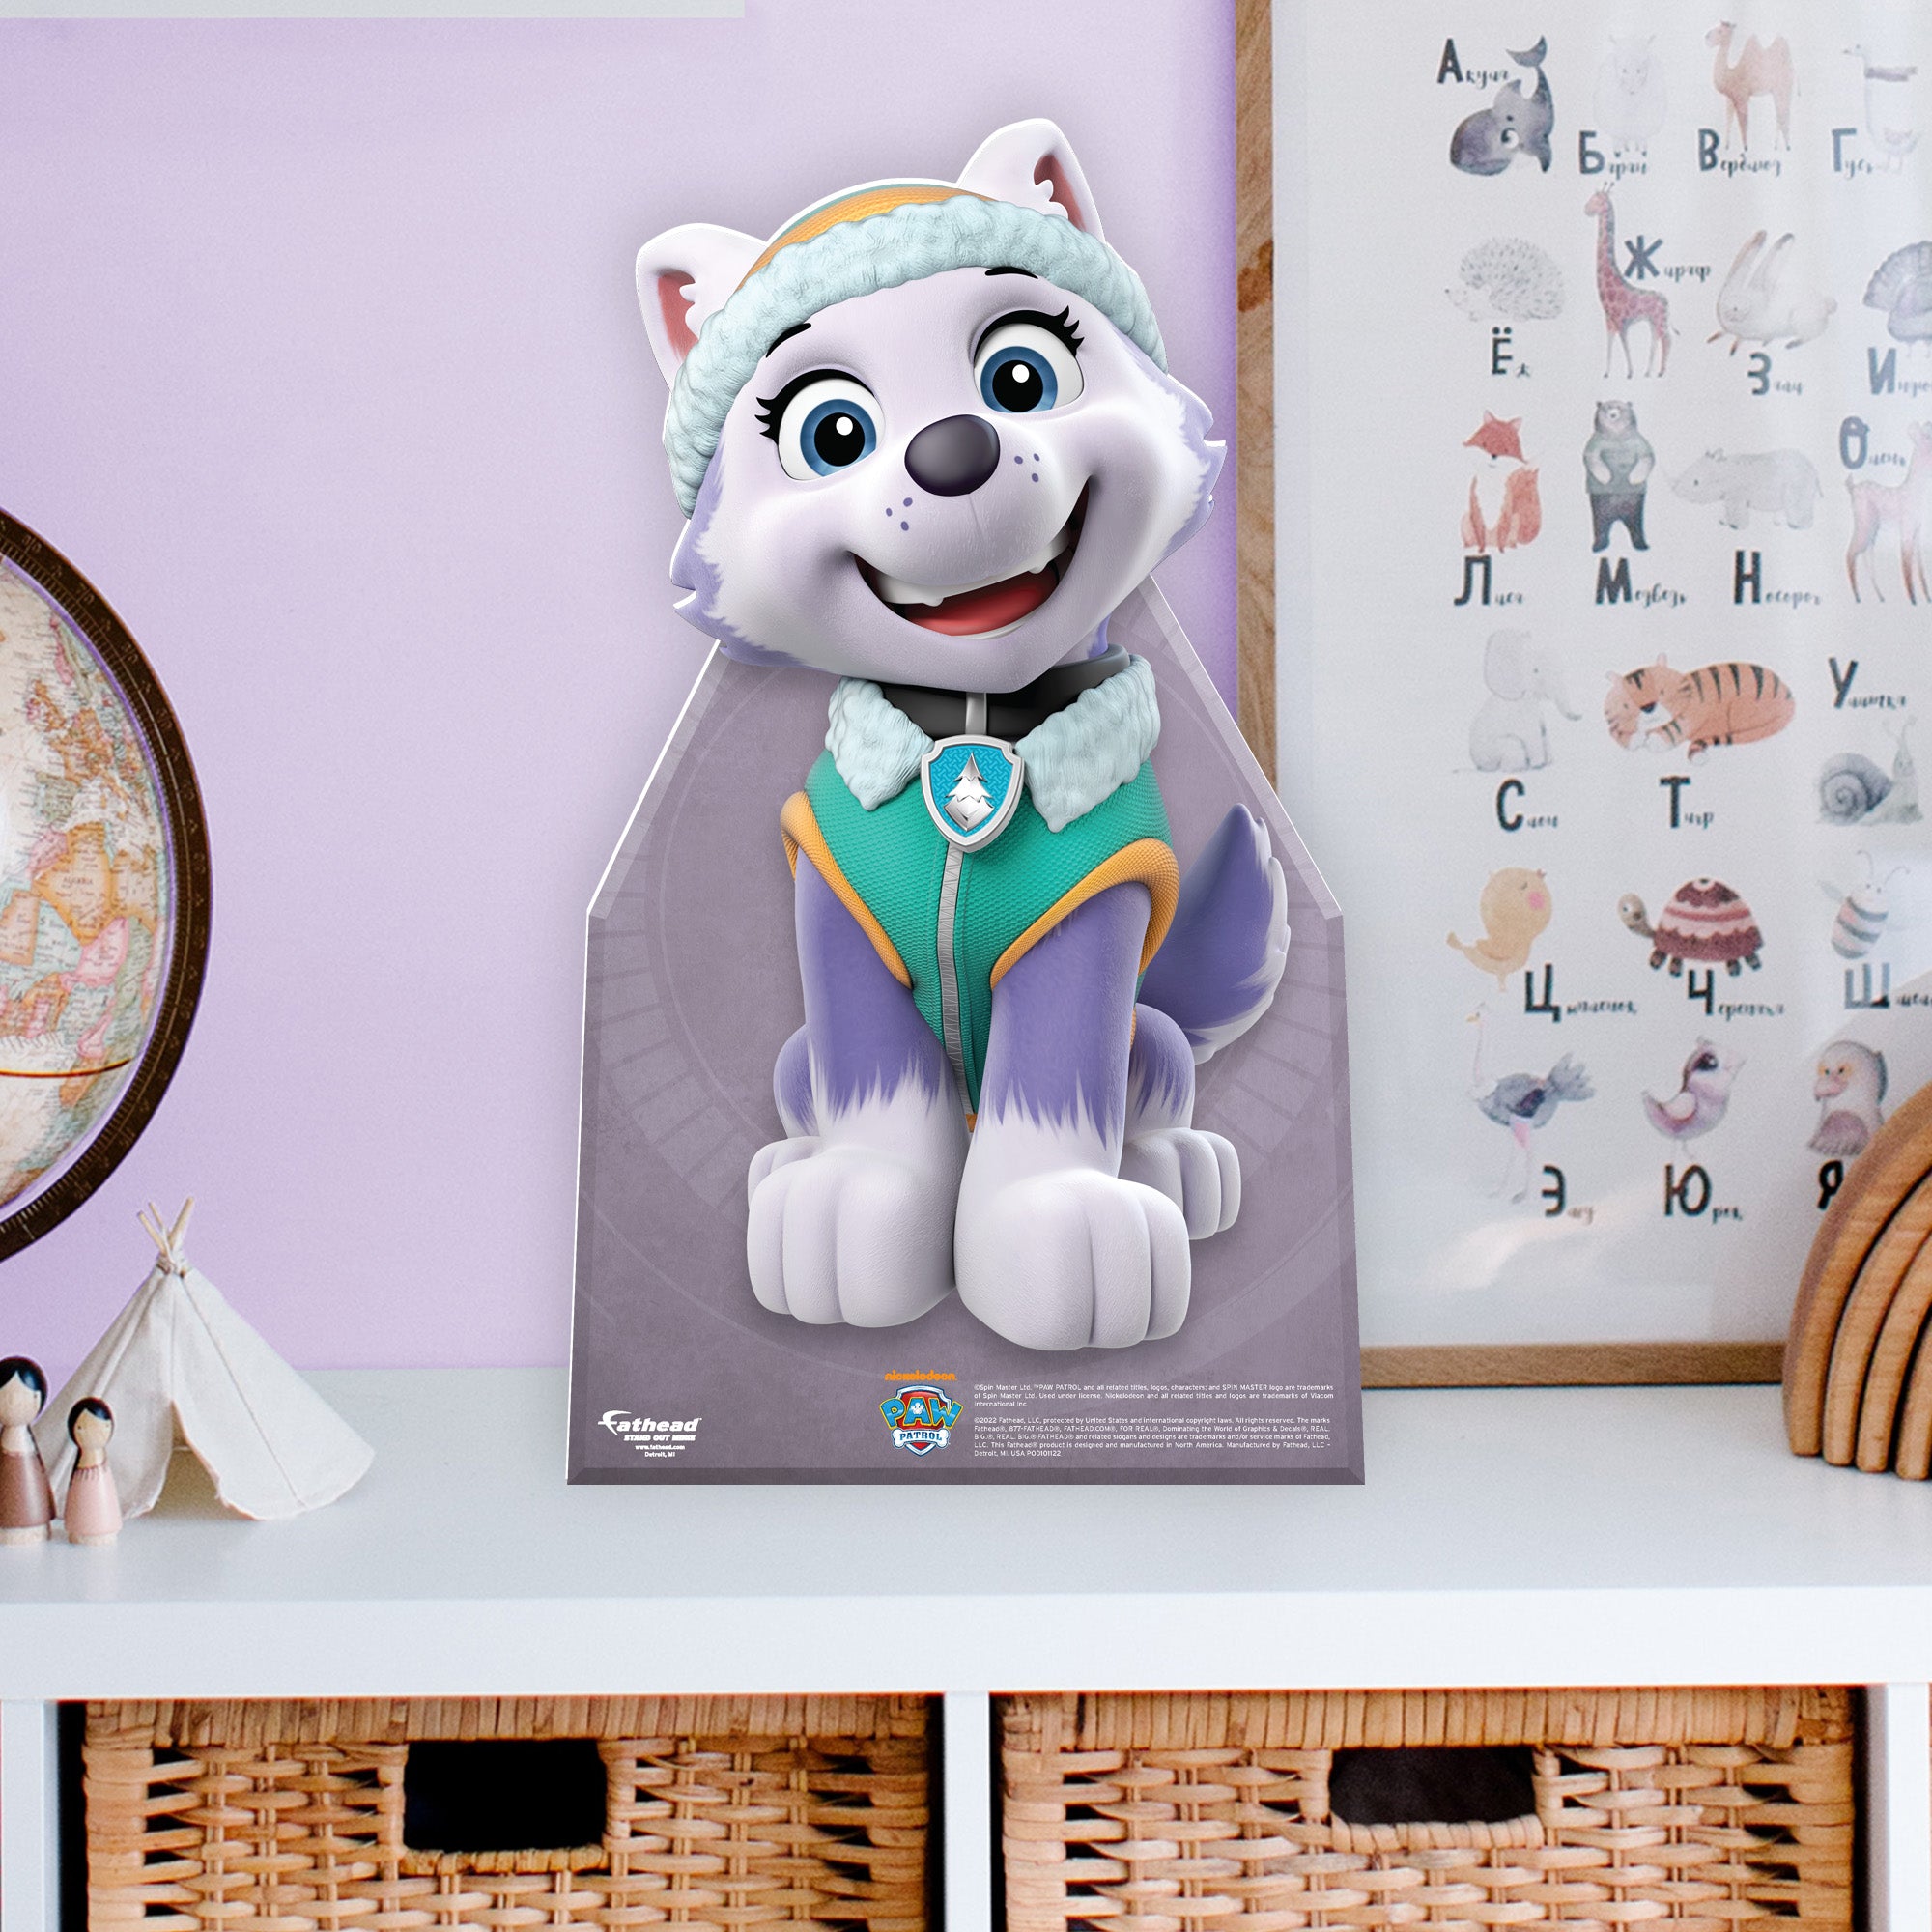 Paw Patrol: Everest Officially Fathead Cutout Cardstock - – Licensed Nickelodeon